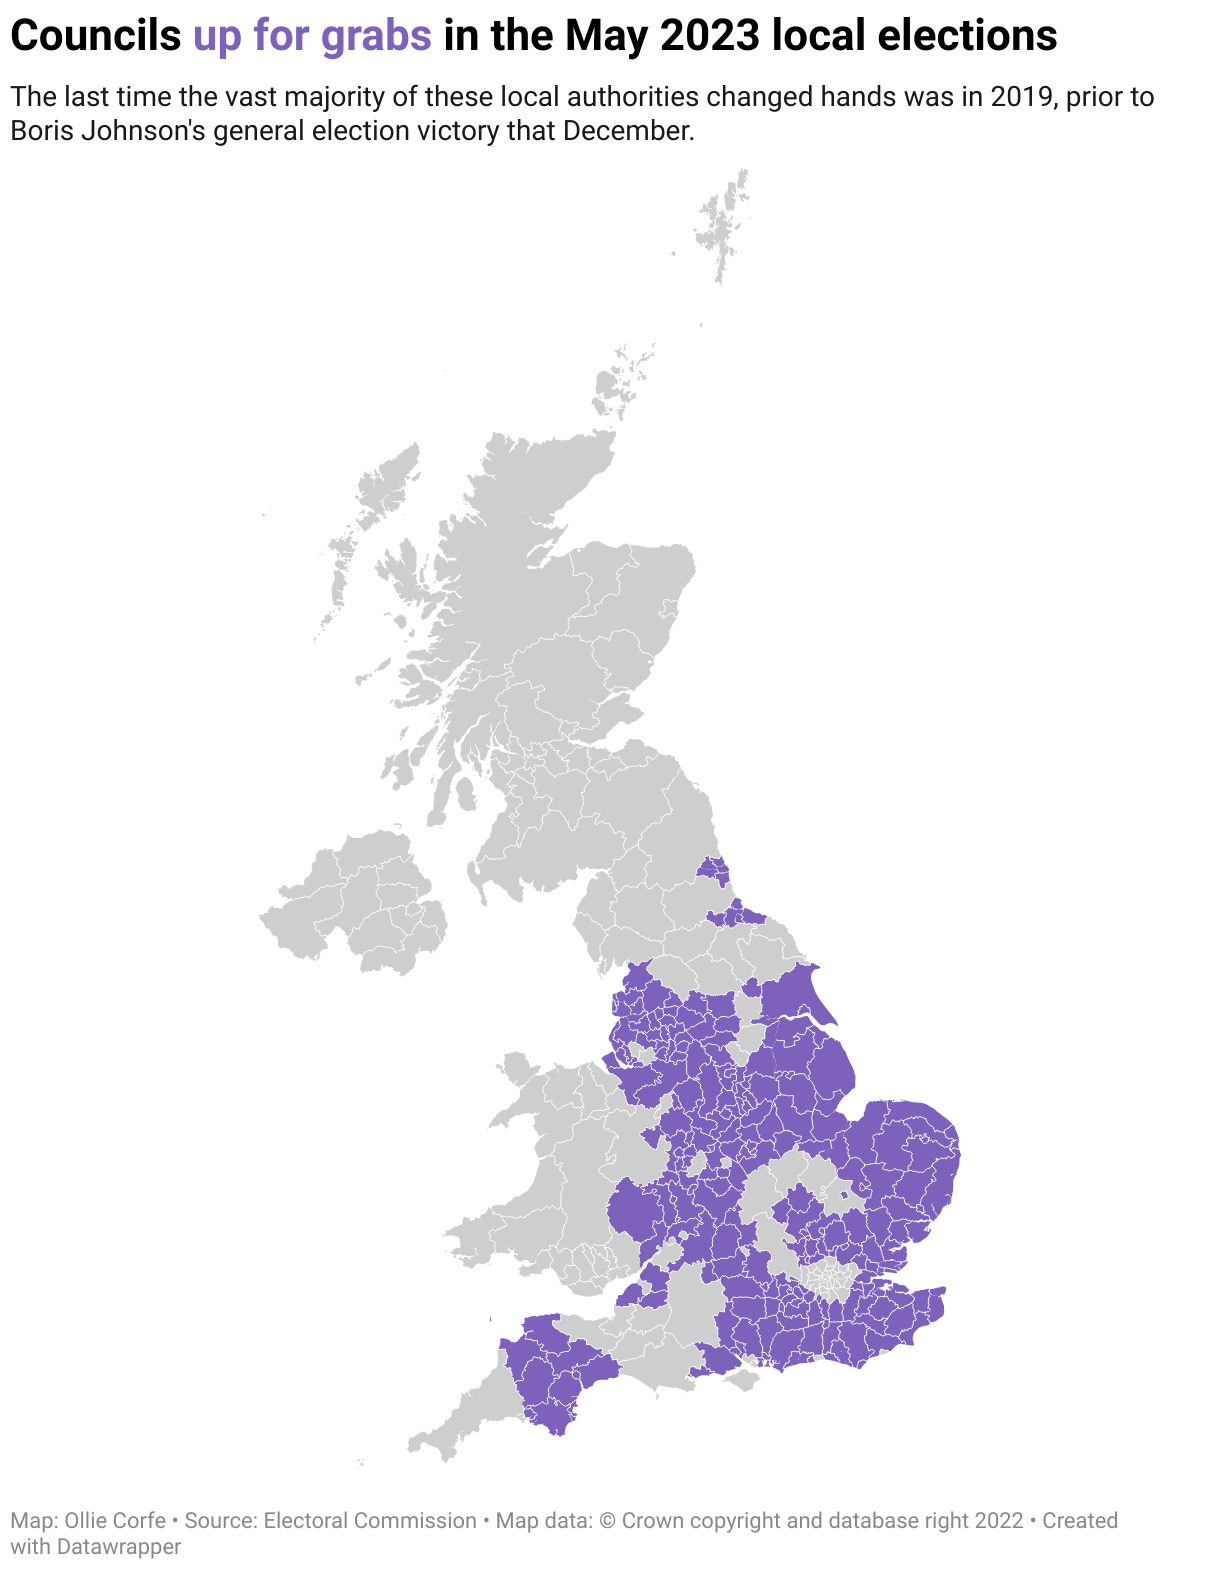 Map of councils up for grabs in May 2023 local elections.